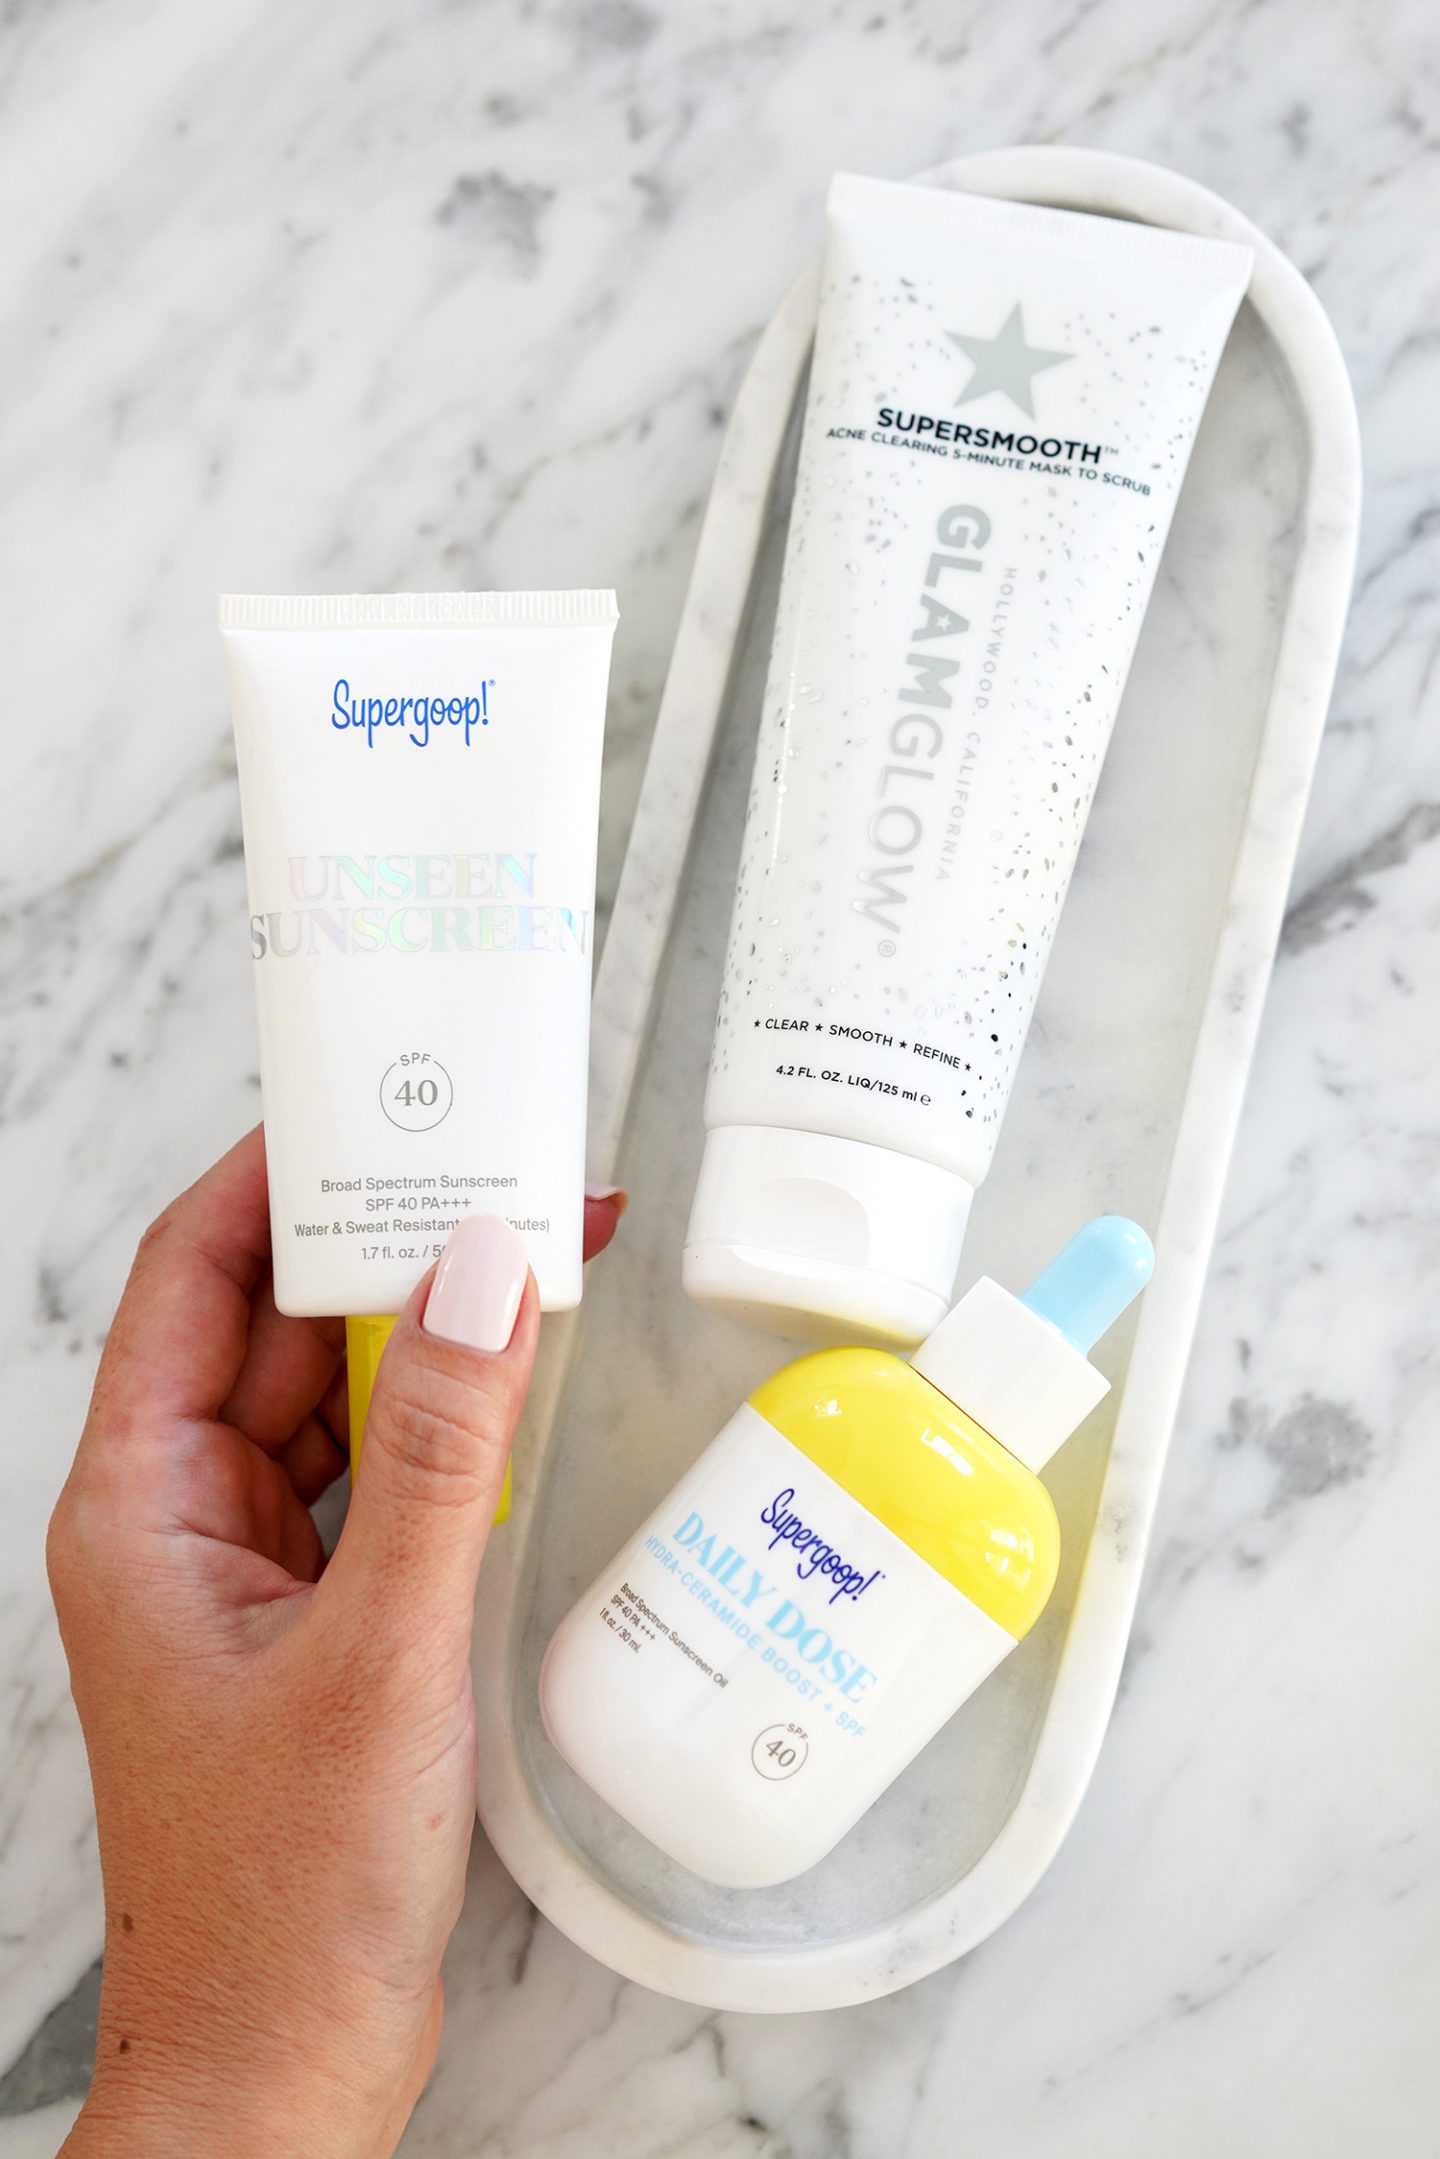 Skincare and Sunscreen Glamglow and Supergoop